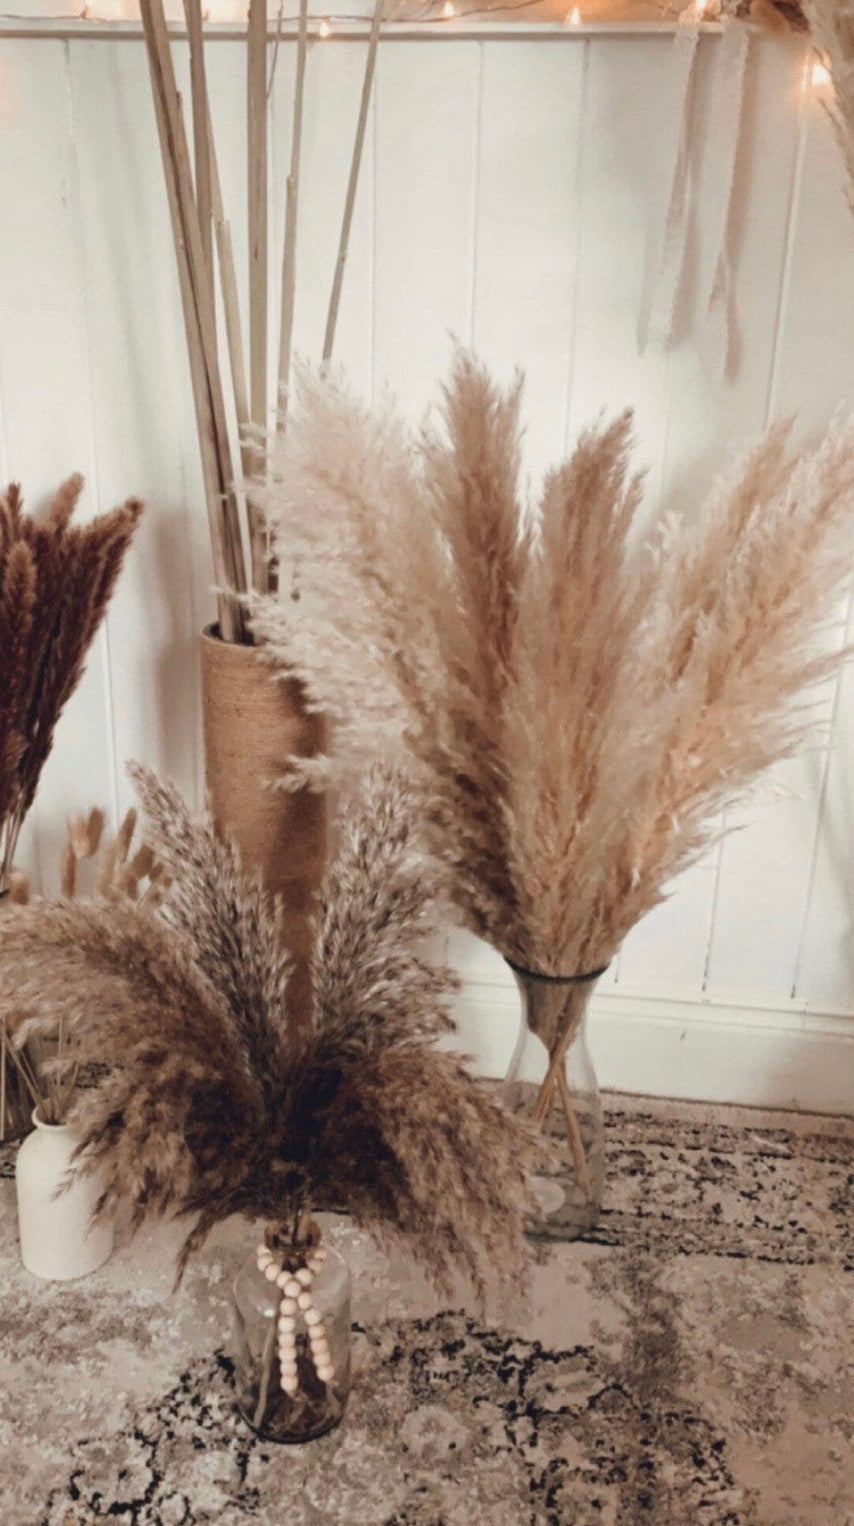 Sale extra large cream fluffy natural pampas grass 60-140cm pampas stem, gift for her, dried flowers, pampass grass / pampas bouquet